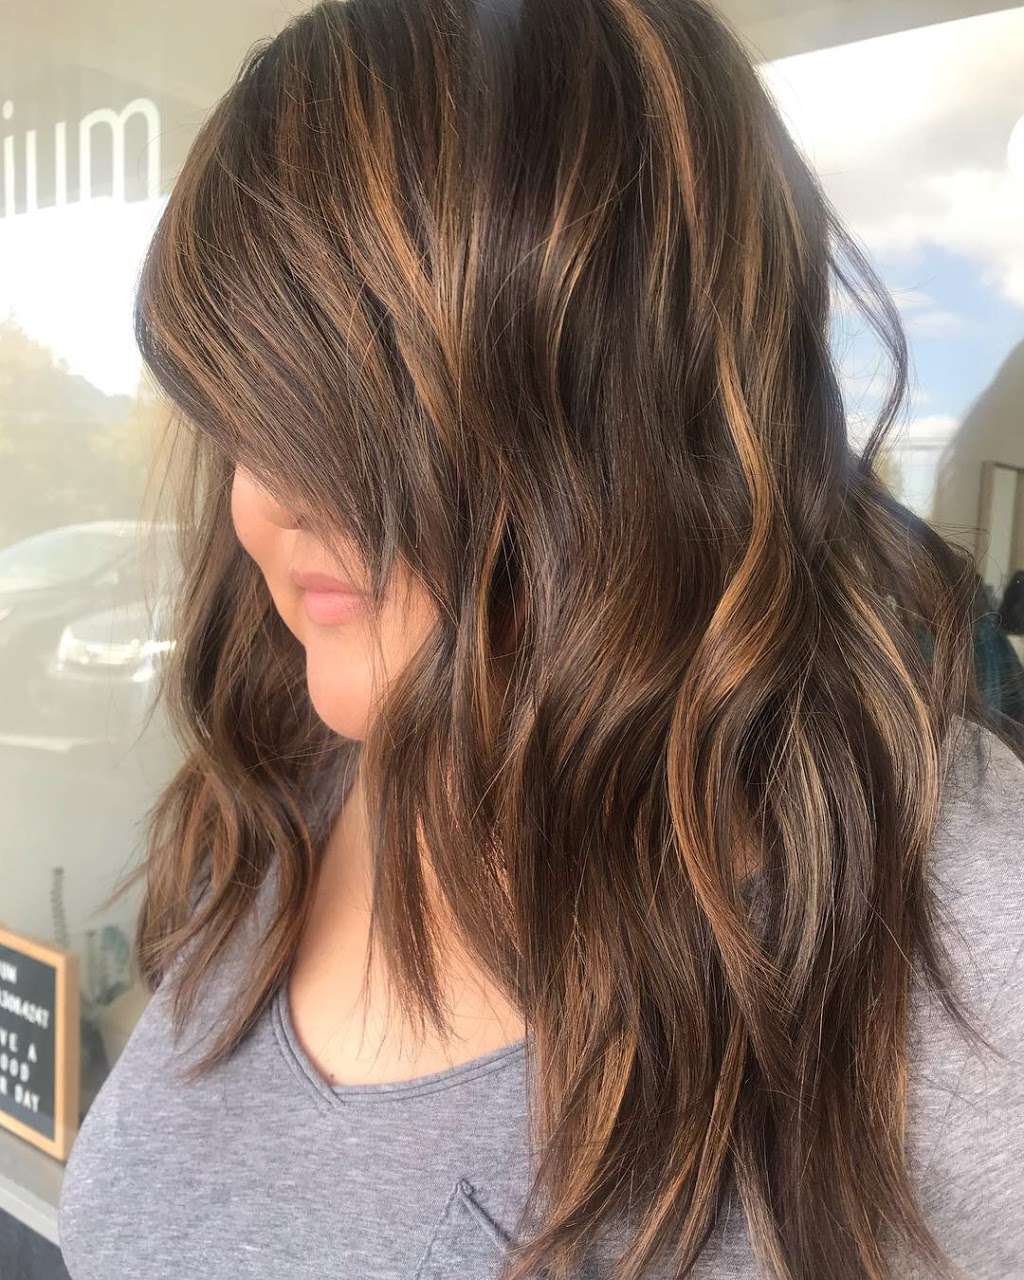 Hair By Erna Hobbs | 10633 S Foothill Blvd, Cupertino, CA 95014, USA | Phone: (408) 831-2881